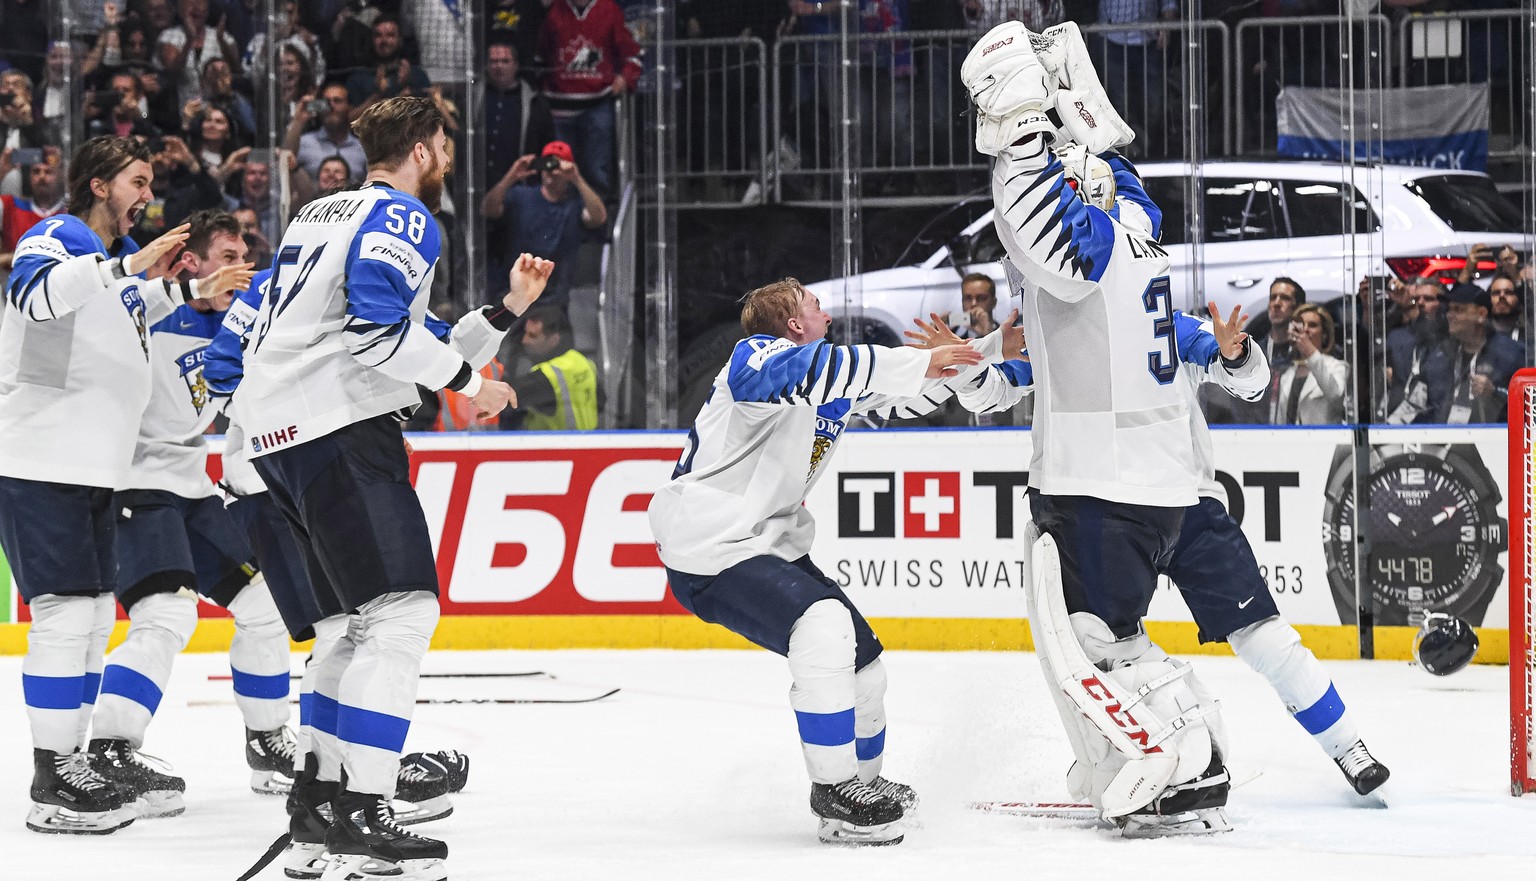 epa07604215 Players of Finland celebrate after winning the IIHF World Championship ice hockey final between Canada and Finland at the Ondrej Nepela Arena in Bratislava, Slovakia, 26 May 2019. Finland  ...